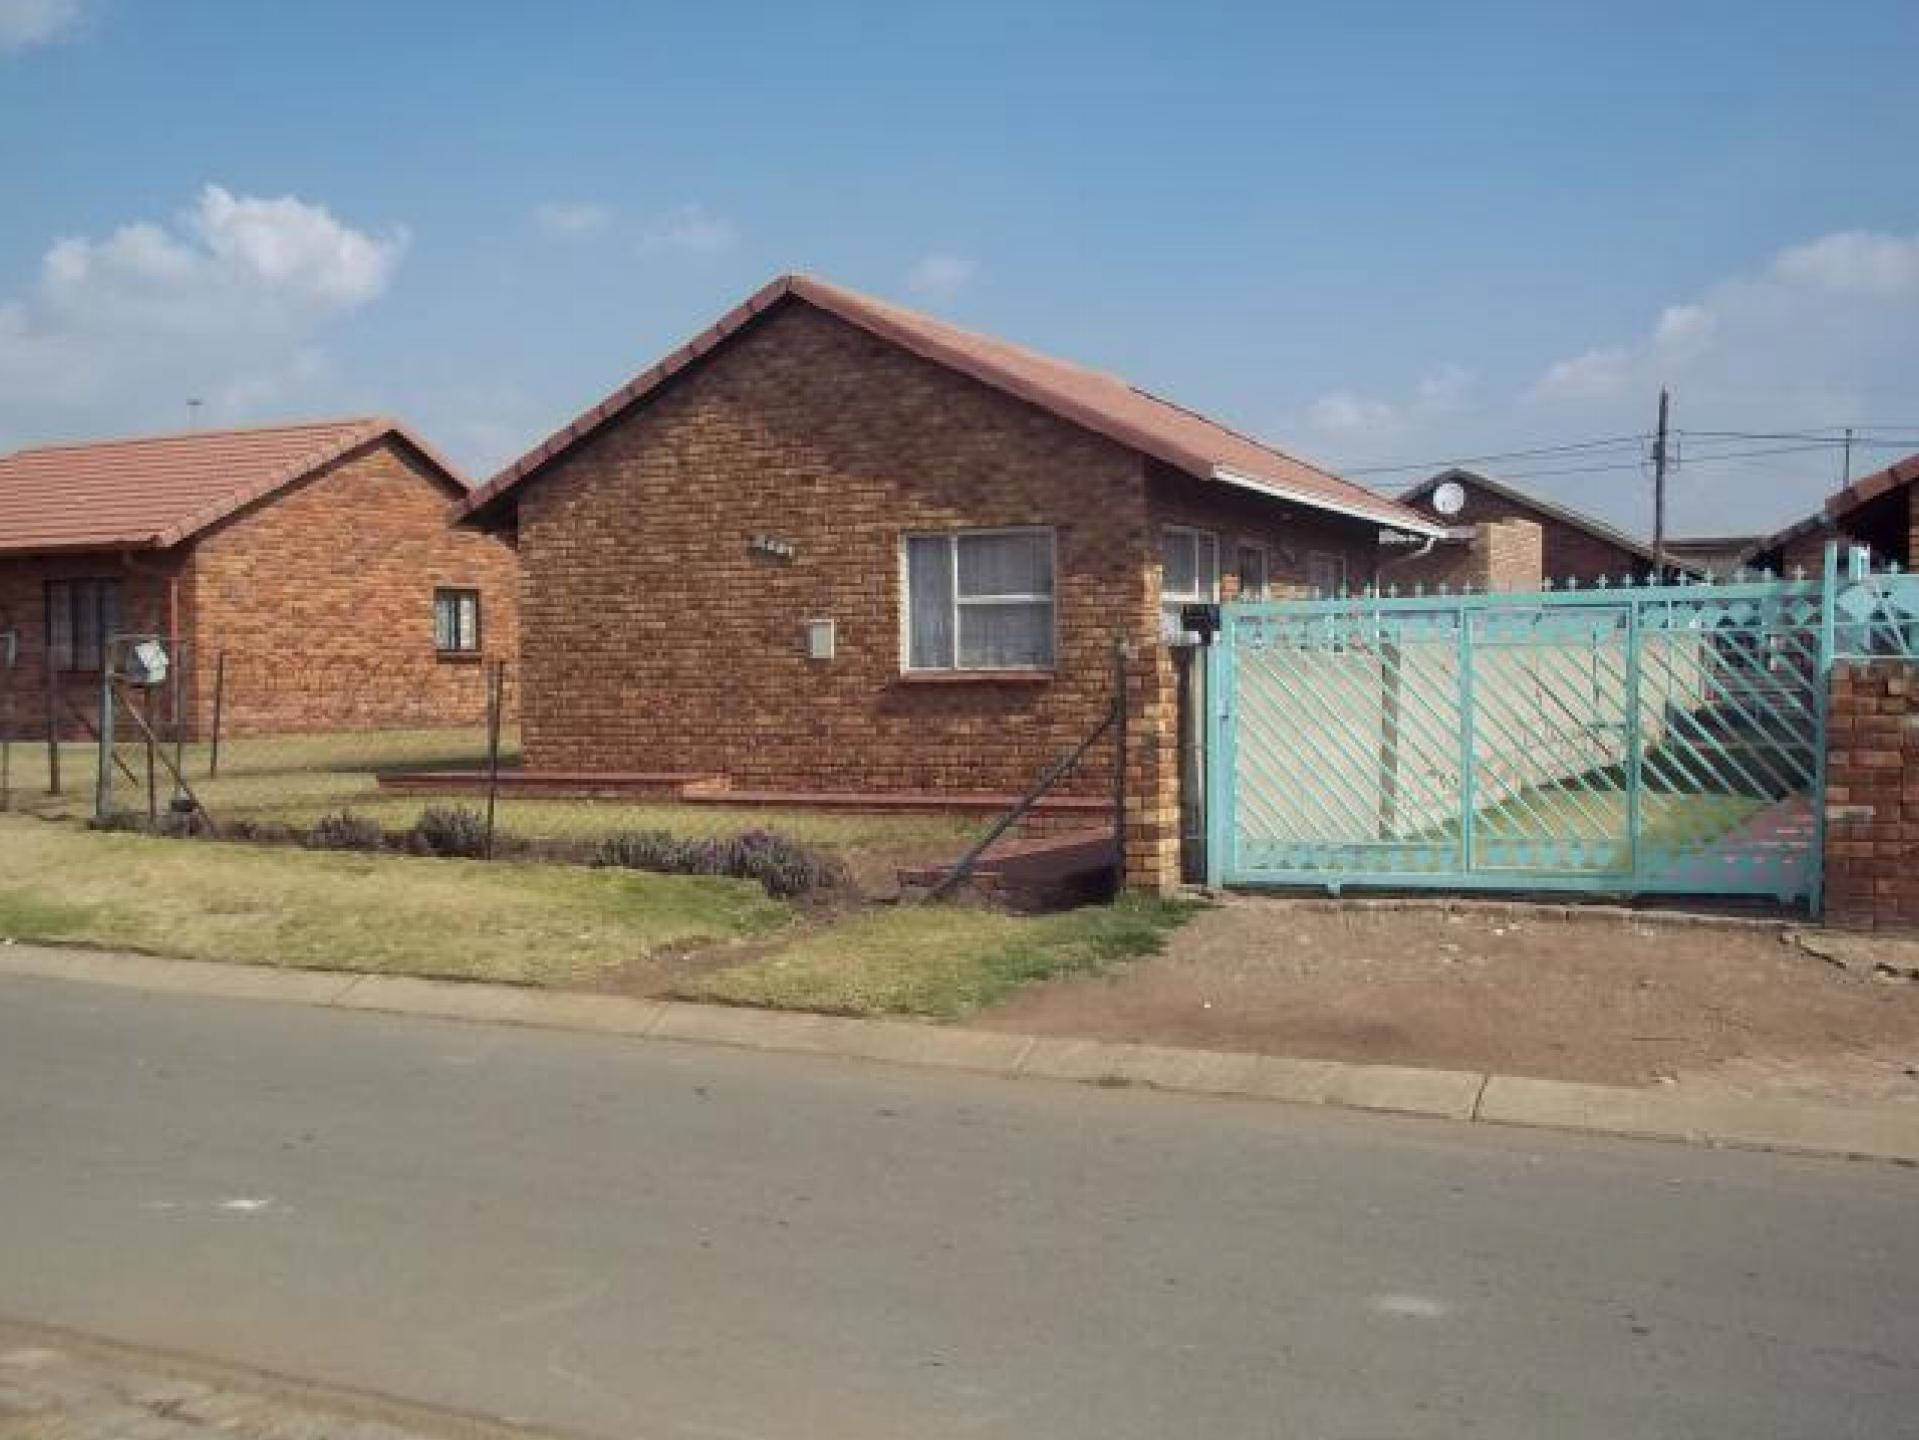 2 bedroom houses for sale in manchester